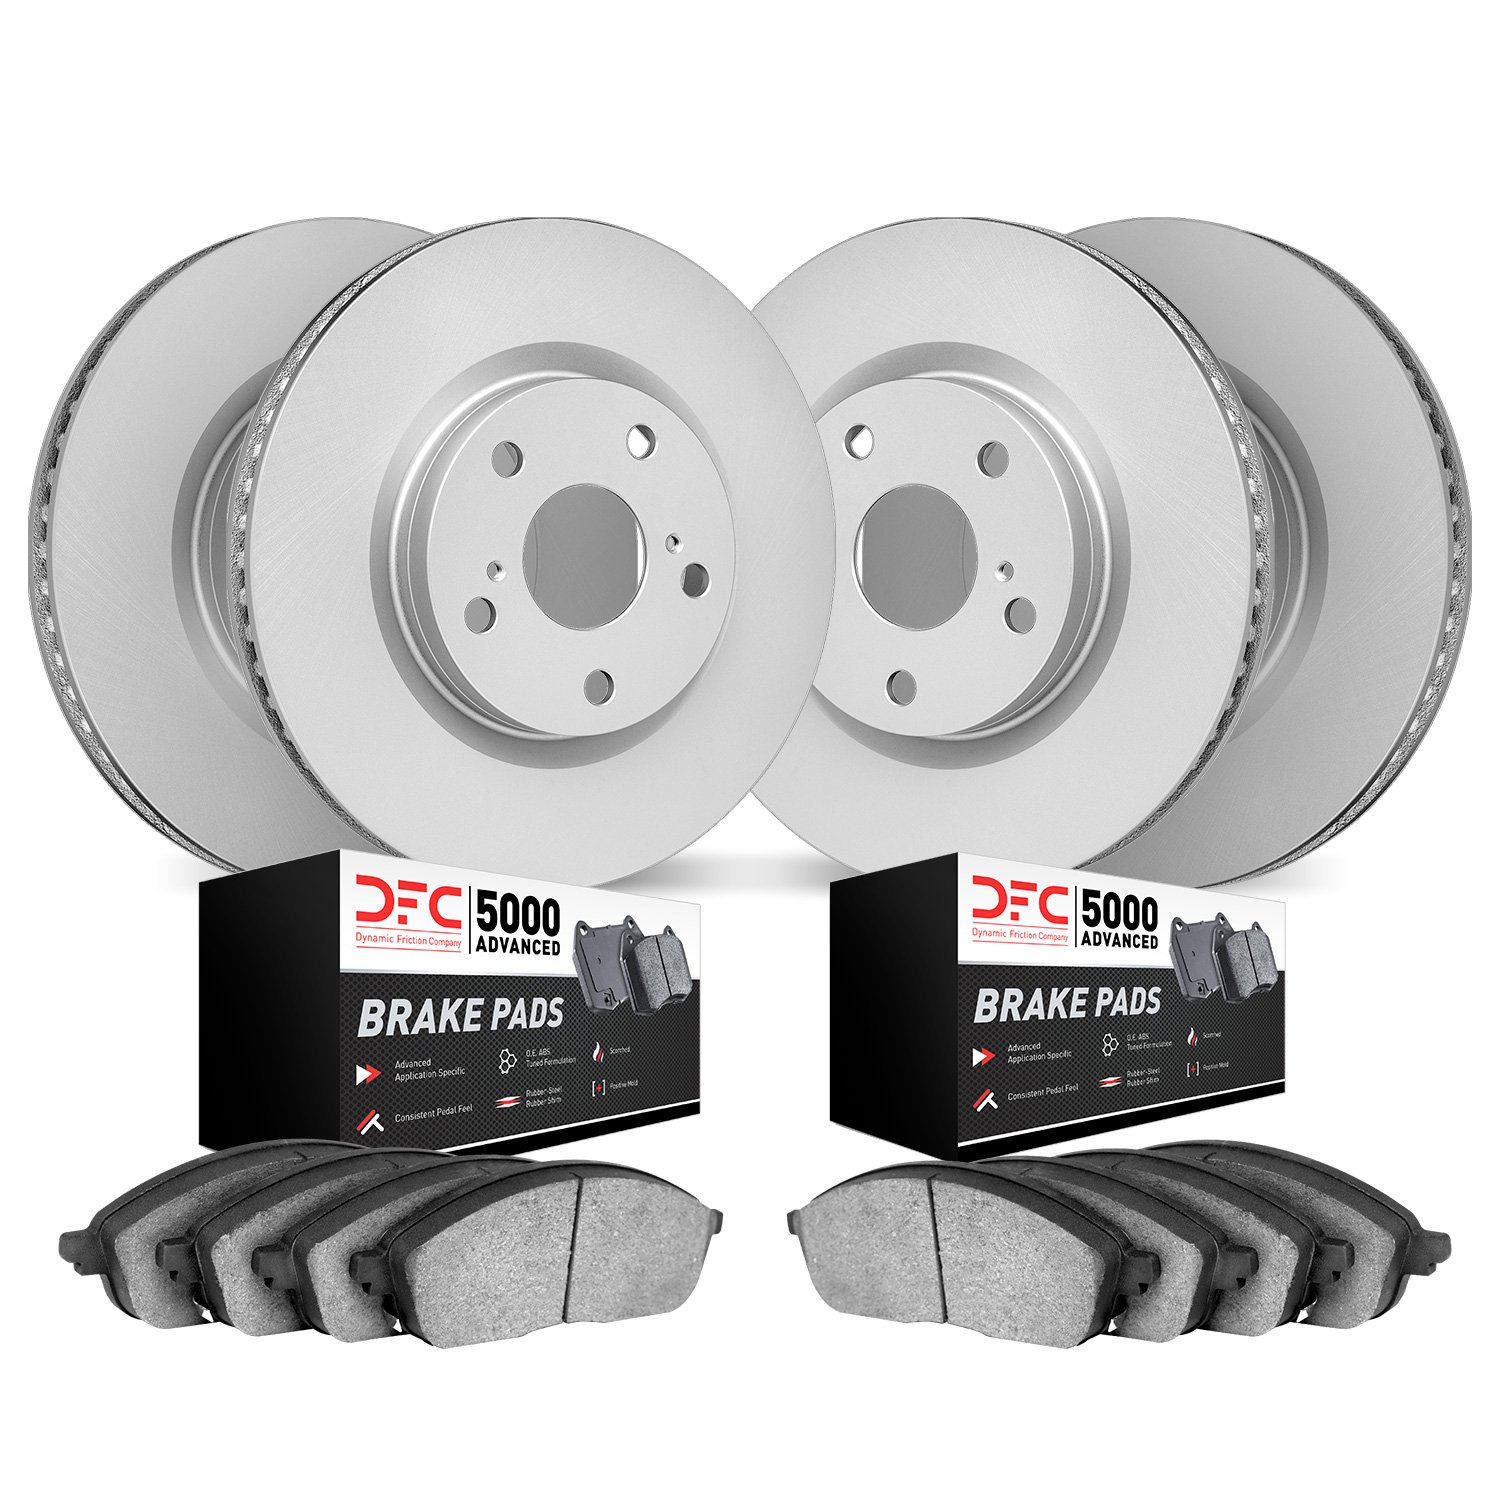 4504-31149 Geospec Brake Rotors w/5000 Advanced Brake Pads Kit, Fits Select Lexus/Toyota/Scion, Position: Front and Rear